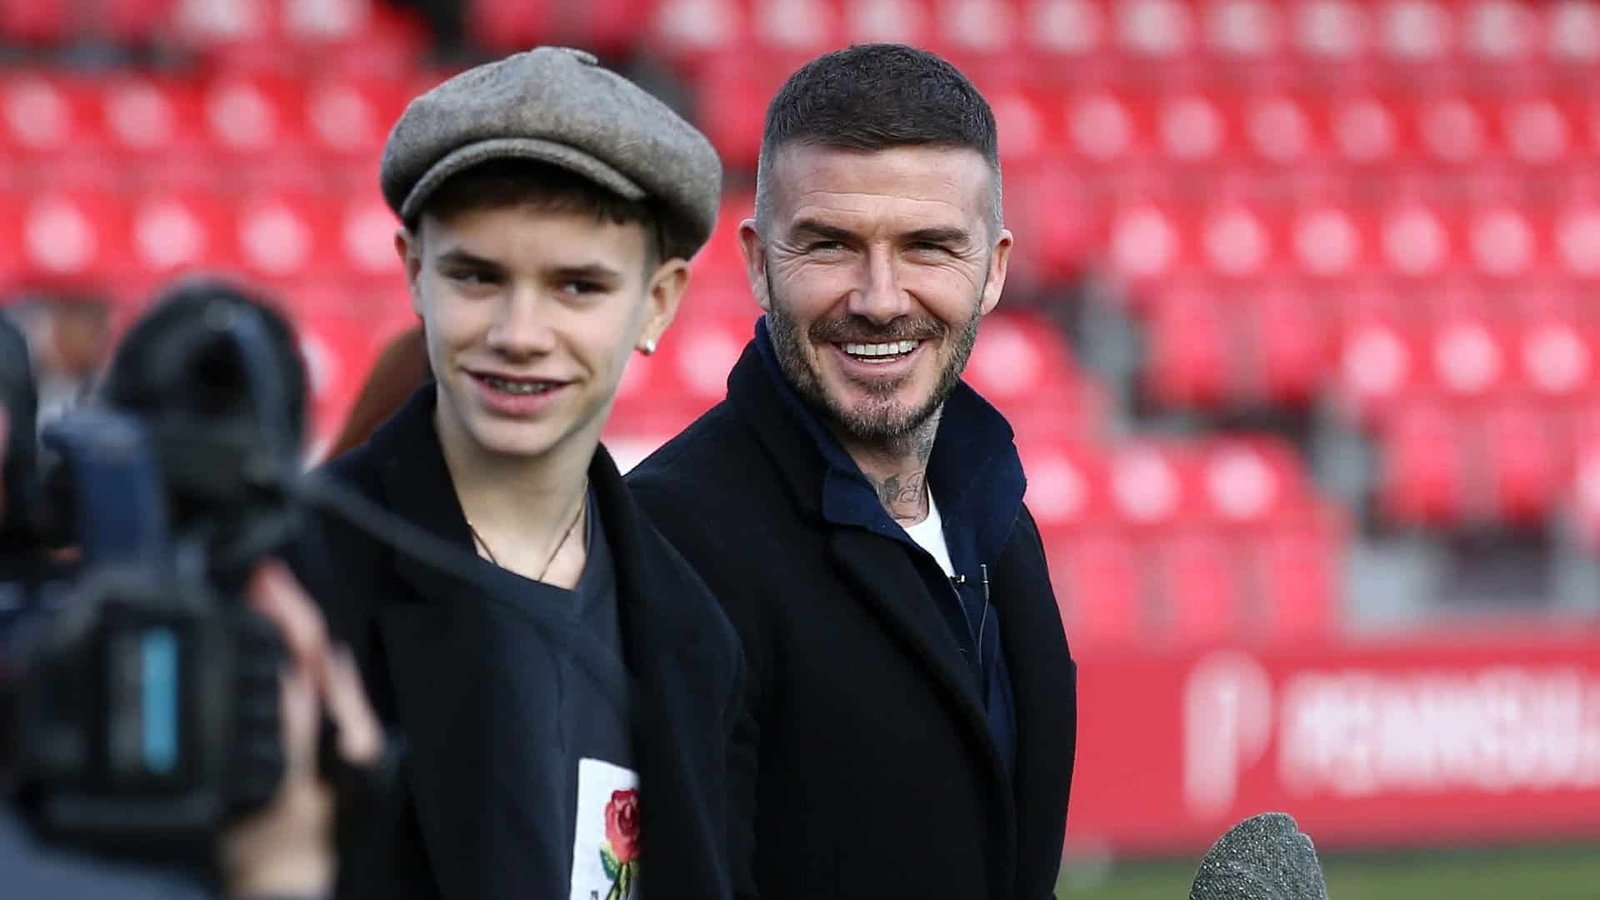 Romeo, the son of David Beckham, stepped into the football world